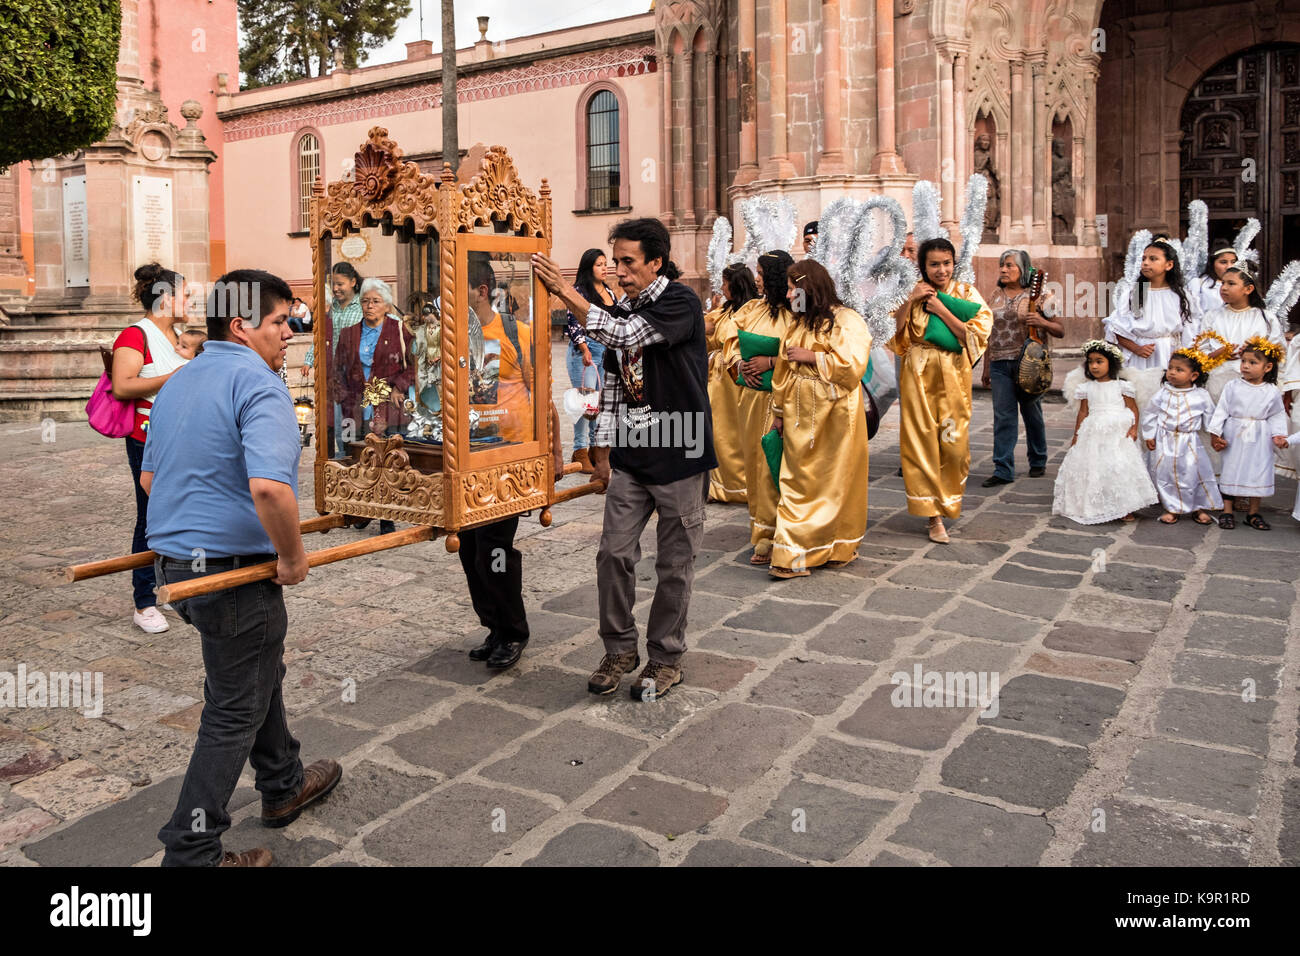 Local residents carry the statue of Saint Michael from the Parroquia de San Miguel Arcangel church at the start of the week long fiesta of the patron saint September 21, 2017 in San Miguel de Allende, Mexico. Stock Photo